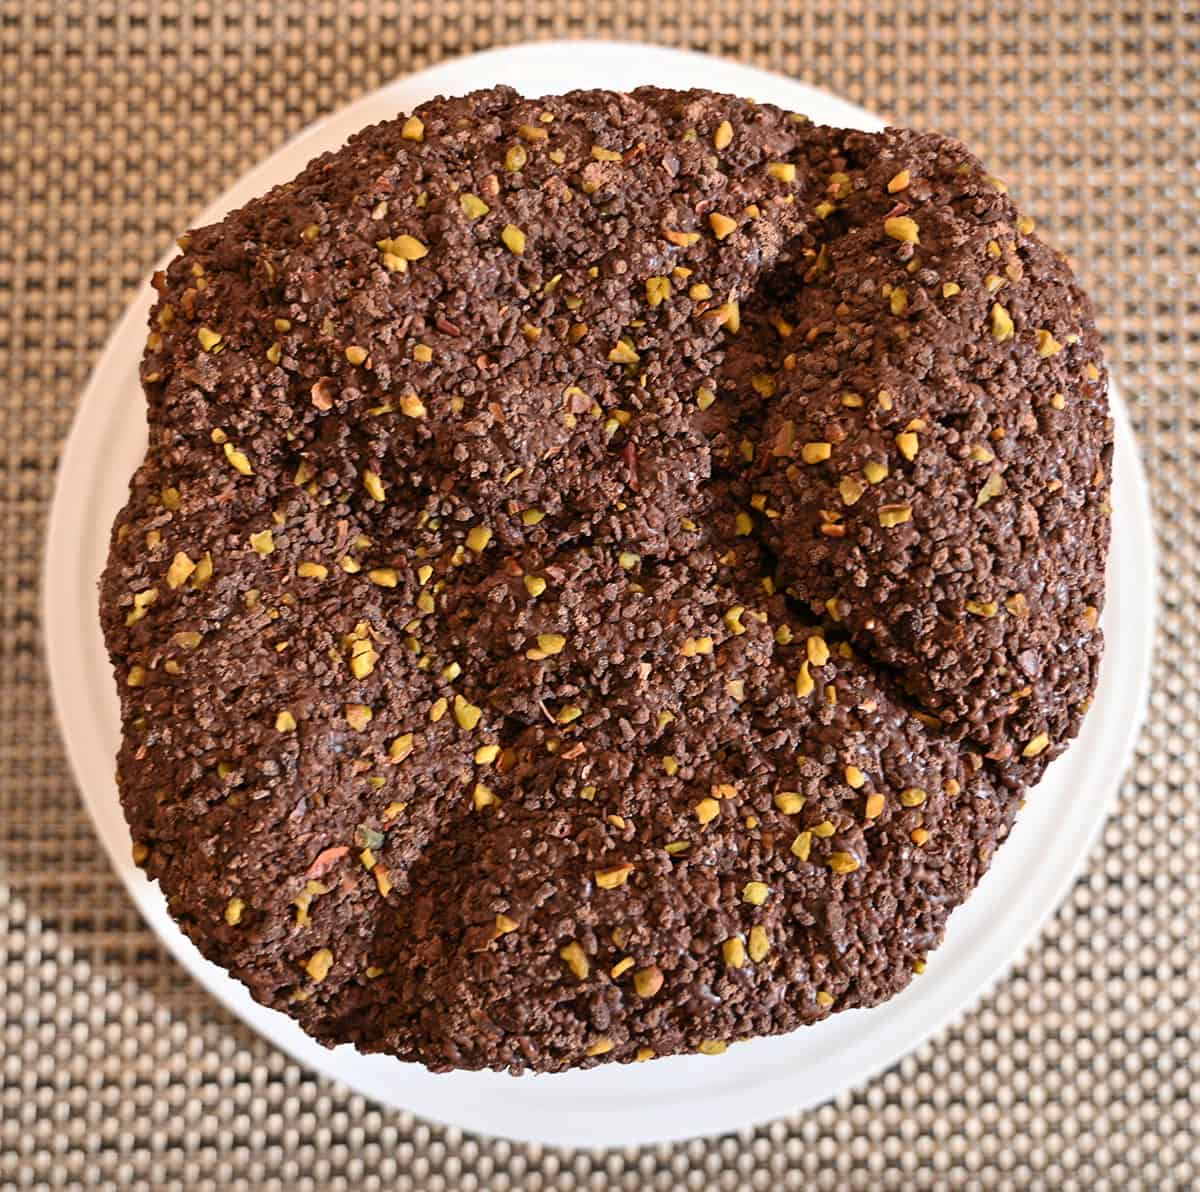 Top down image of the top of the panettone showing the chocolate and pistachios on the top and outside.